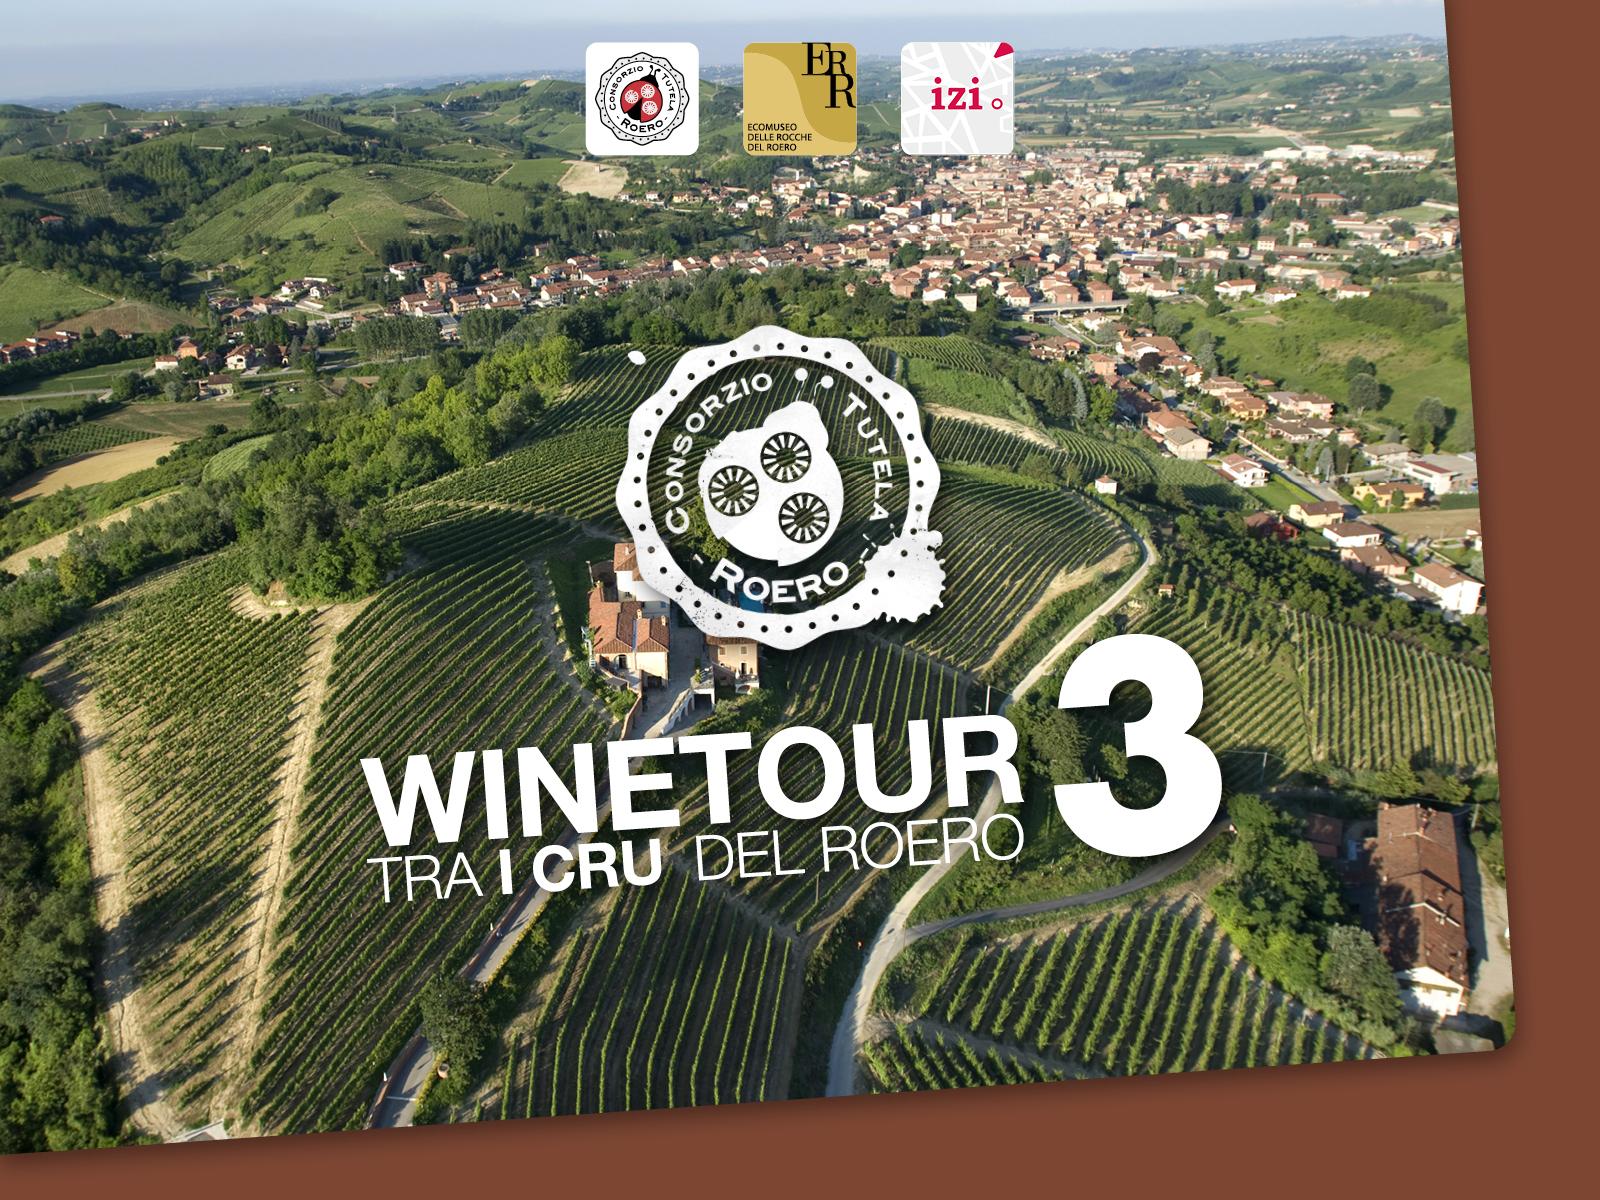 WineTour 3 – The crus at the edge of the Rocche’s area.